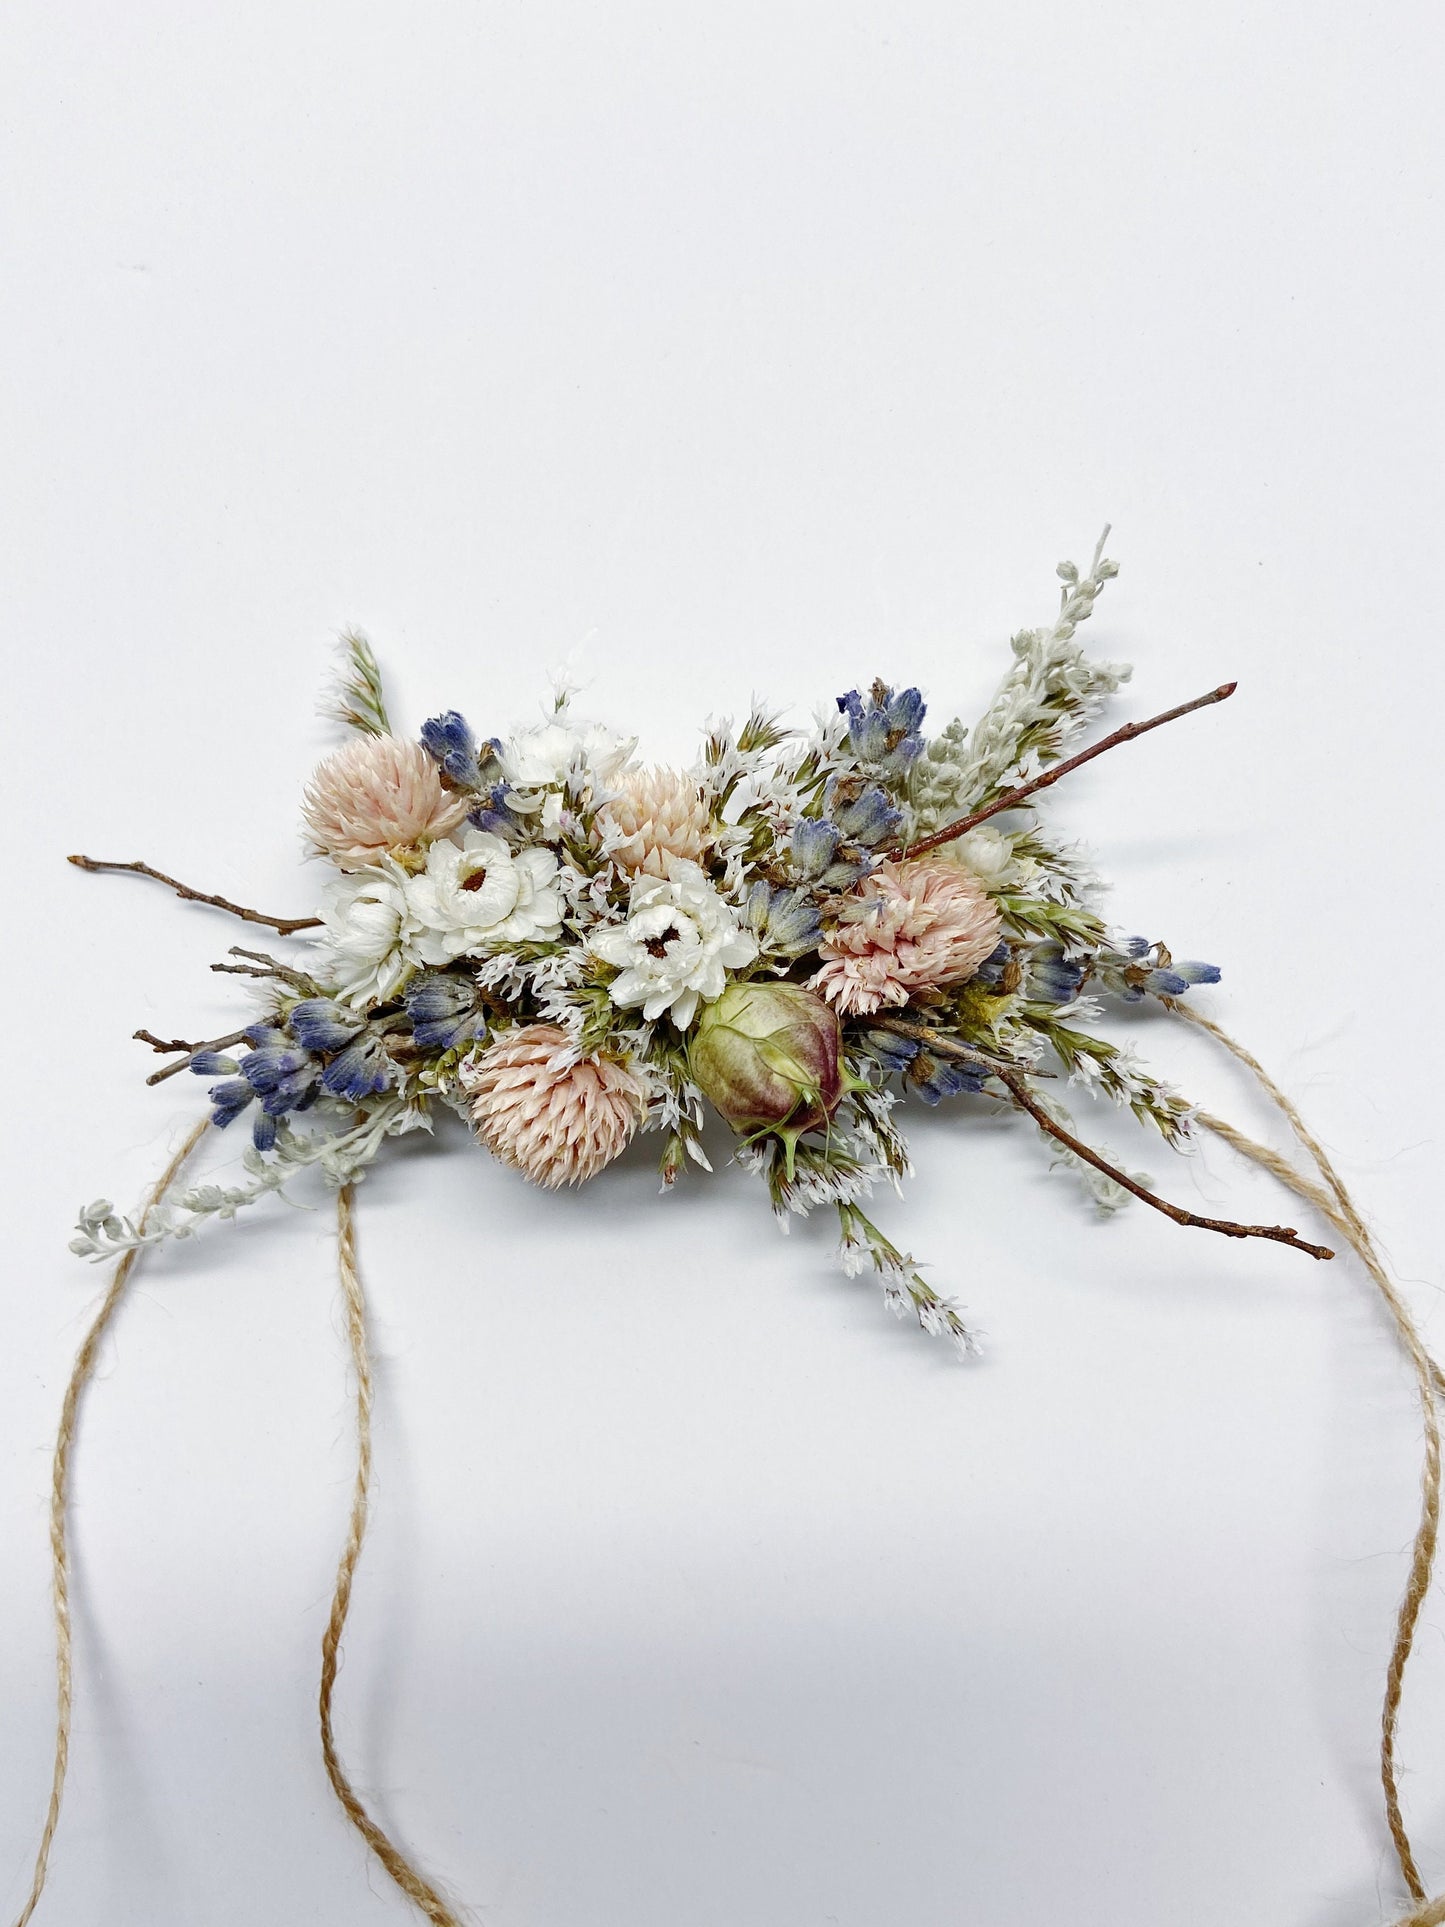 Corsage, wedding accessories, prom, floral corsage, dried flowers, preserved flowers, twine wrap, natural, simple, light color